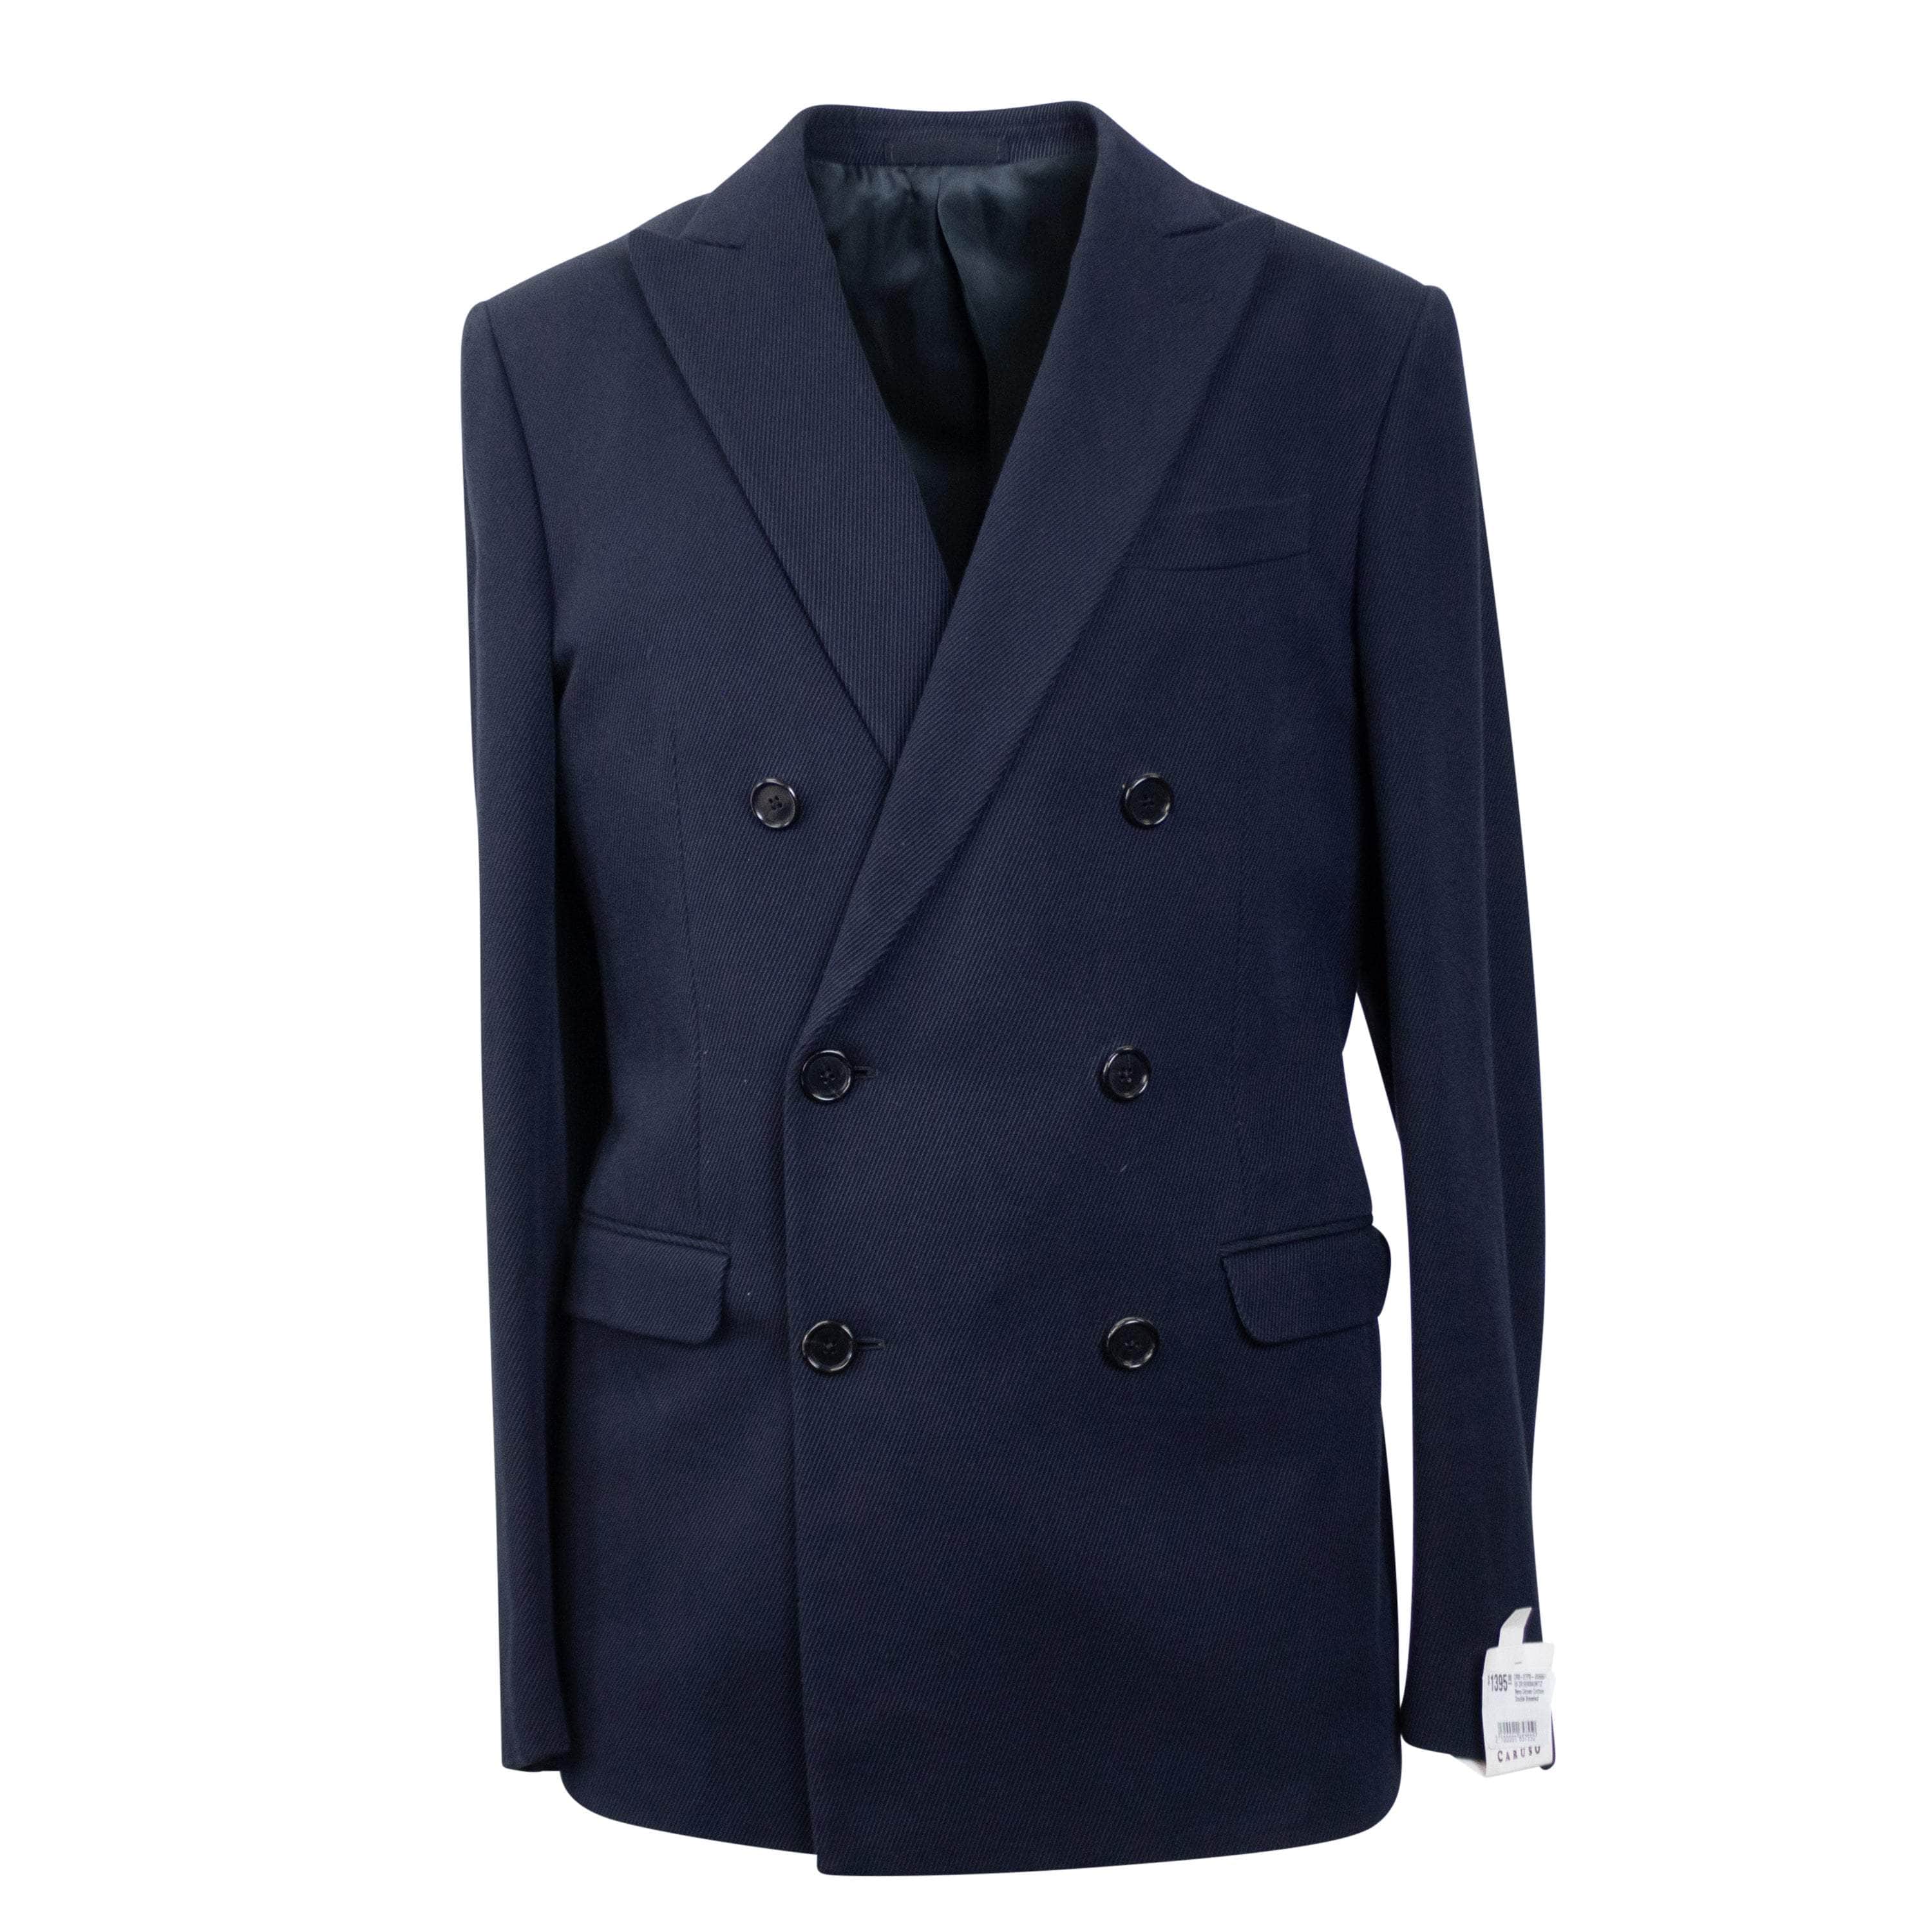 Caruso 500-750, caruso, channelenable-all, chicmi, couponcollection, main-clothing, shop375, size-50, Stadium Goods, stadiumgoods 50 Navy Cotton Double-Breasted Suit 9R CRS-XTPS-0066/50 CRS-XTPS-0066/50